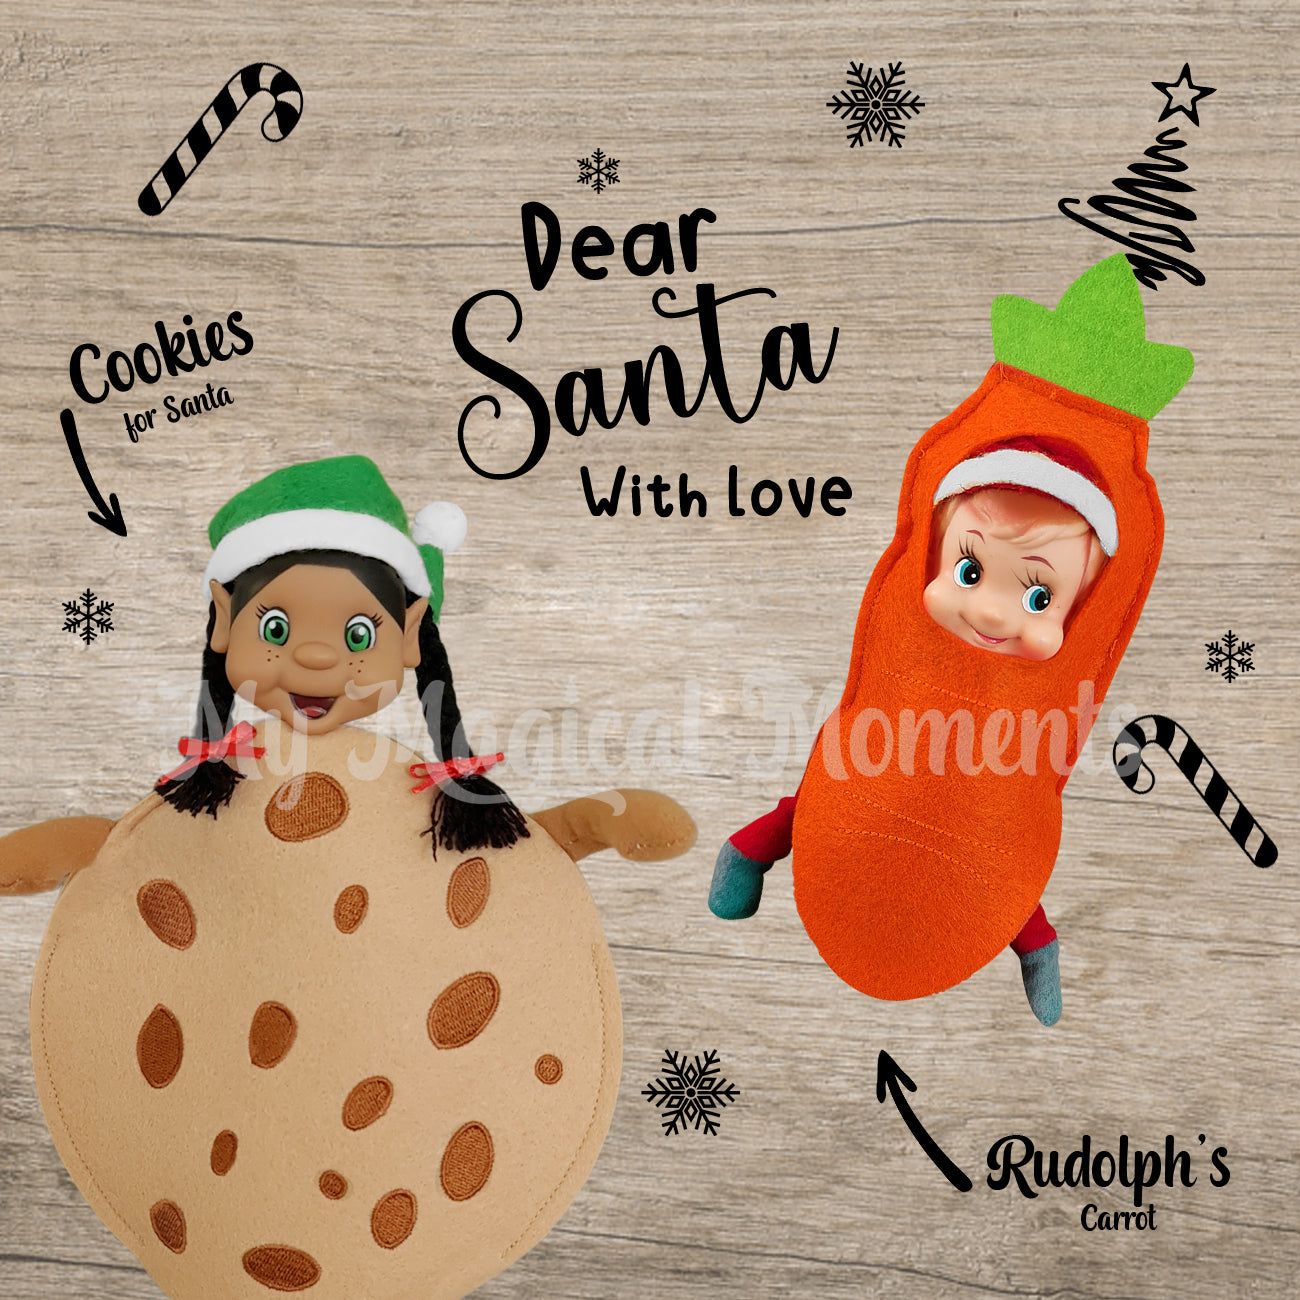 elves dressed in a Cookie and carrot costume left out for santa